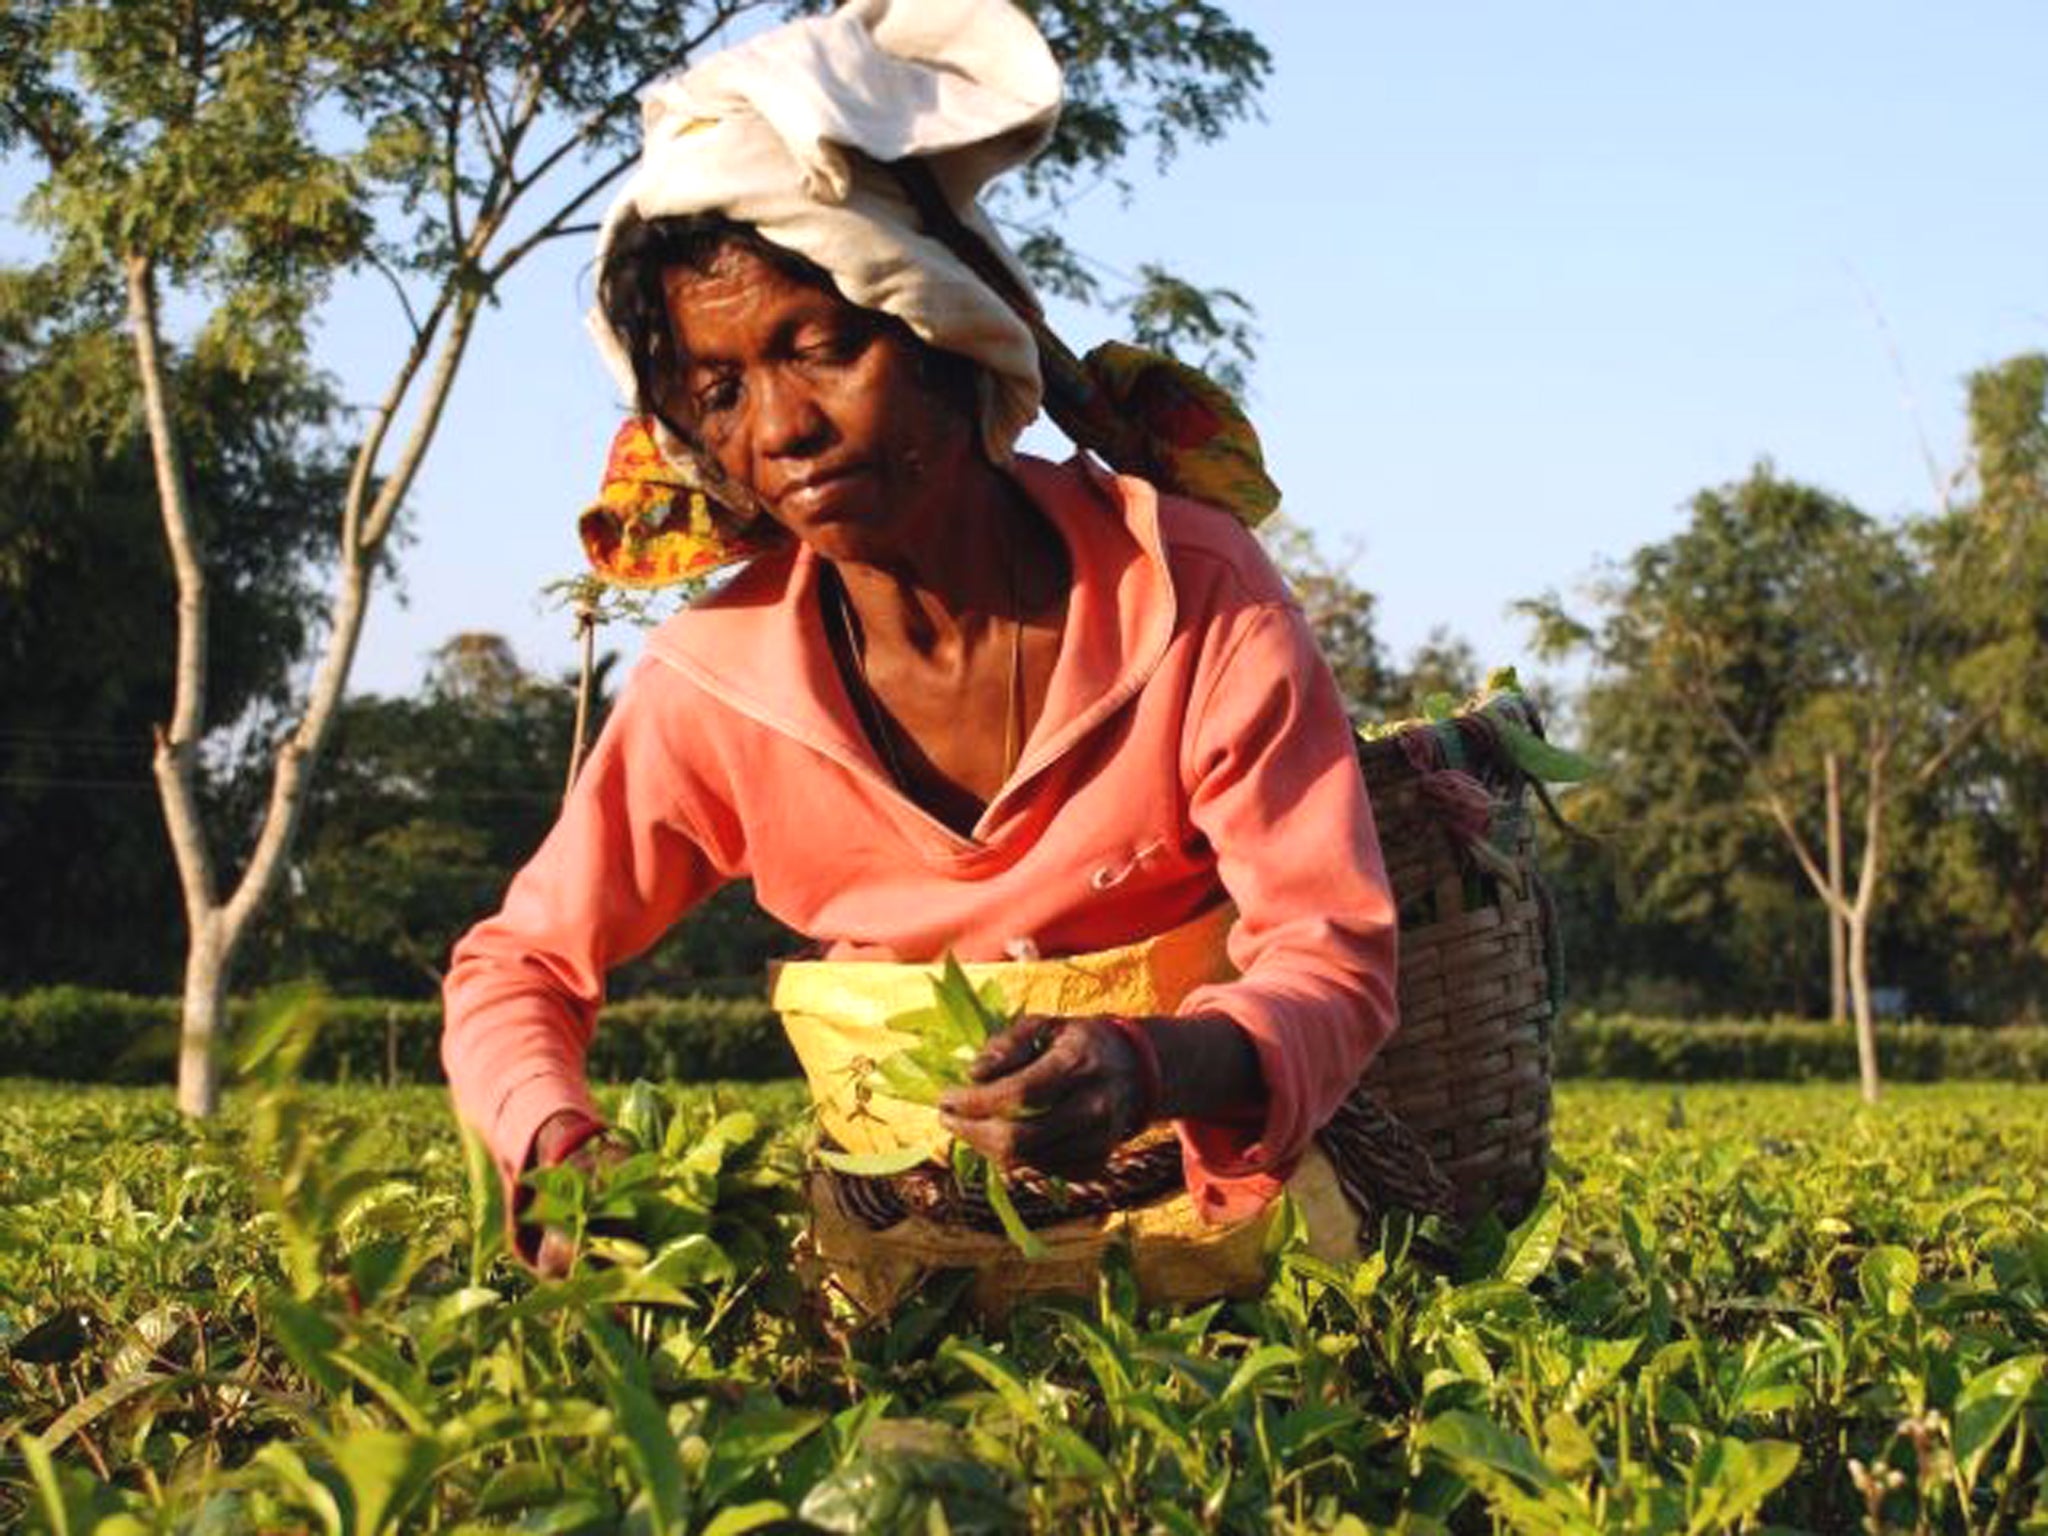 More than half of India's tea production comes from some 800 tea estates across Assam